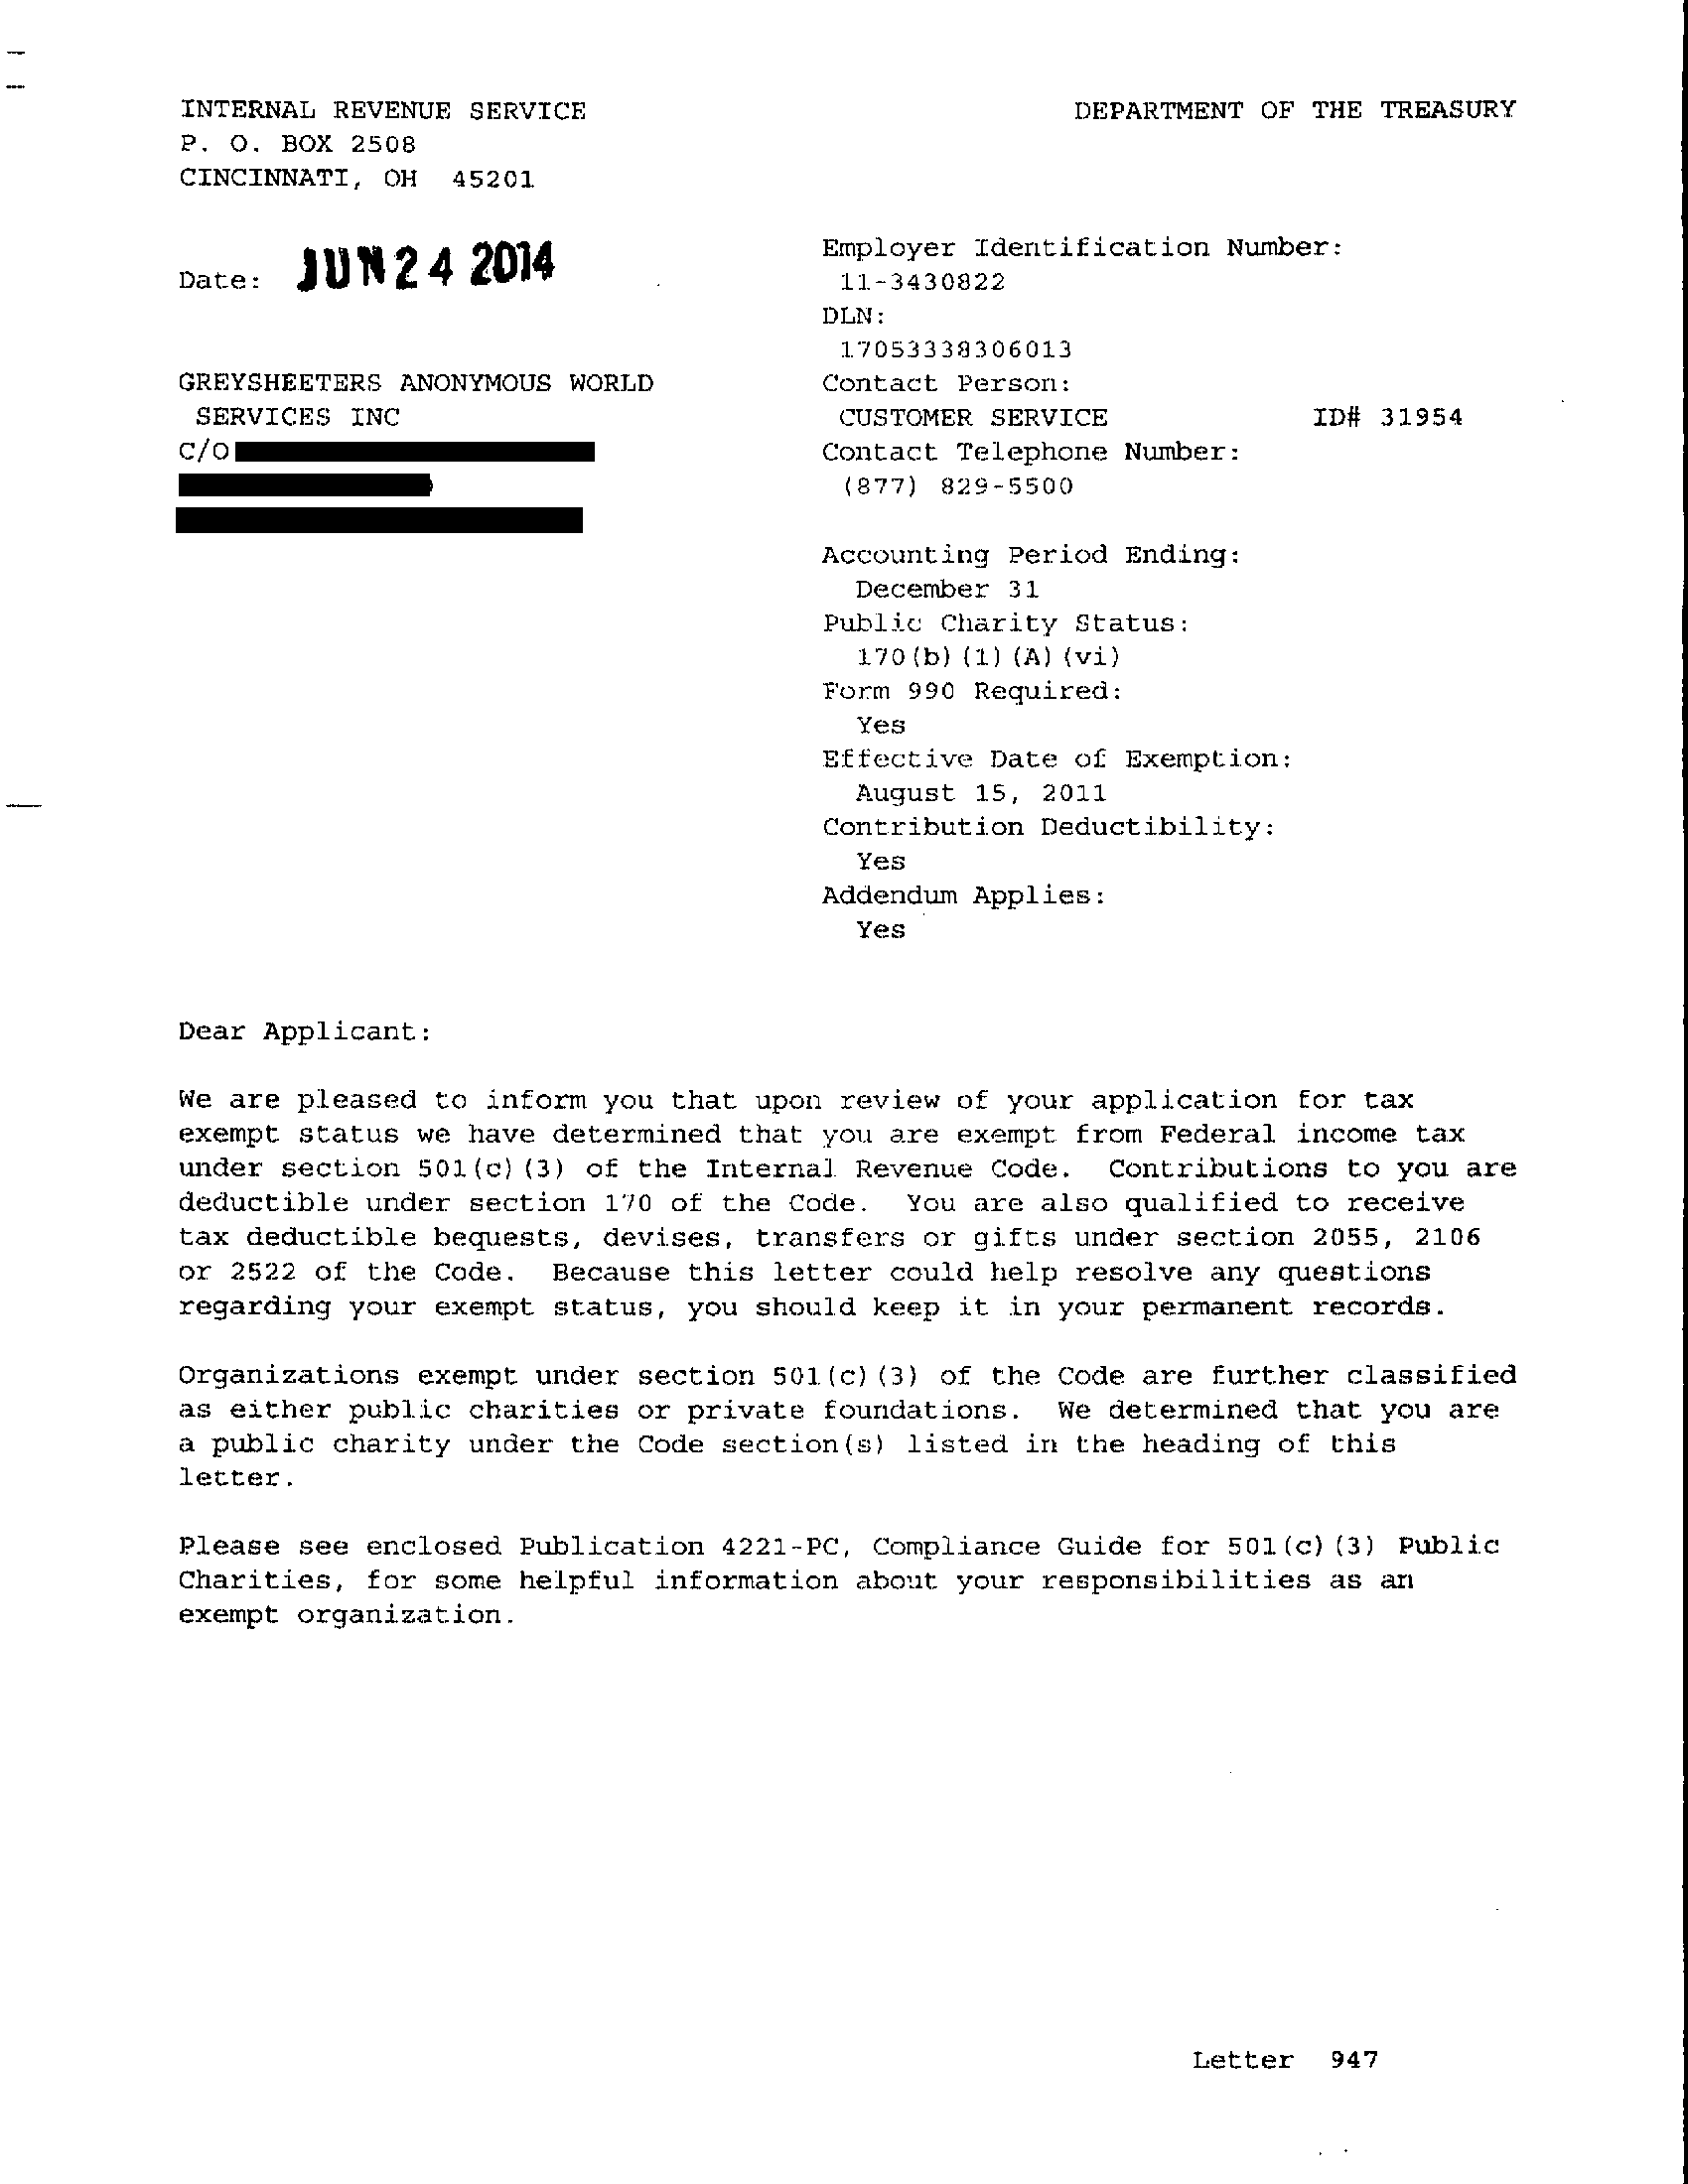 Scanned copy of IRS Final Letter of Determination of tax-exempt status for GSAWS, Inc, dated June 24, 2014. Name and address of agent are redacted to protect member anonymity.